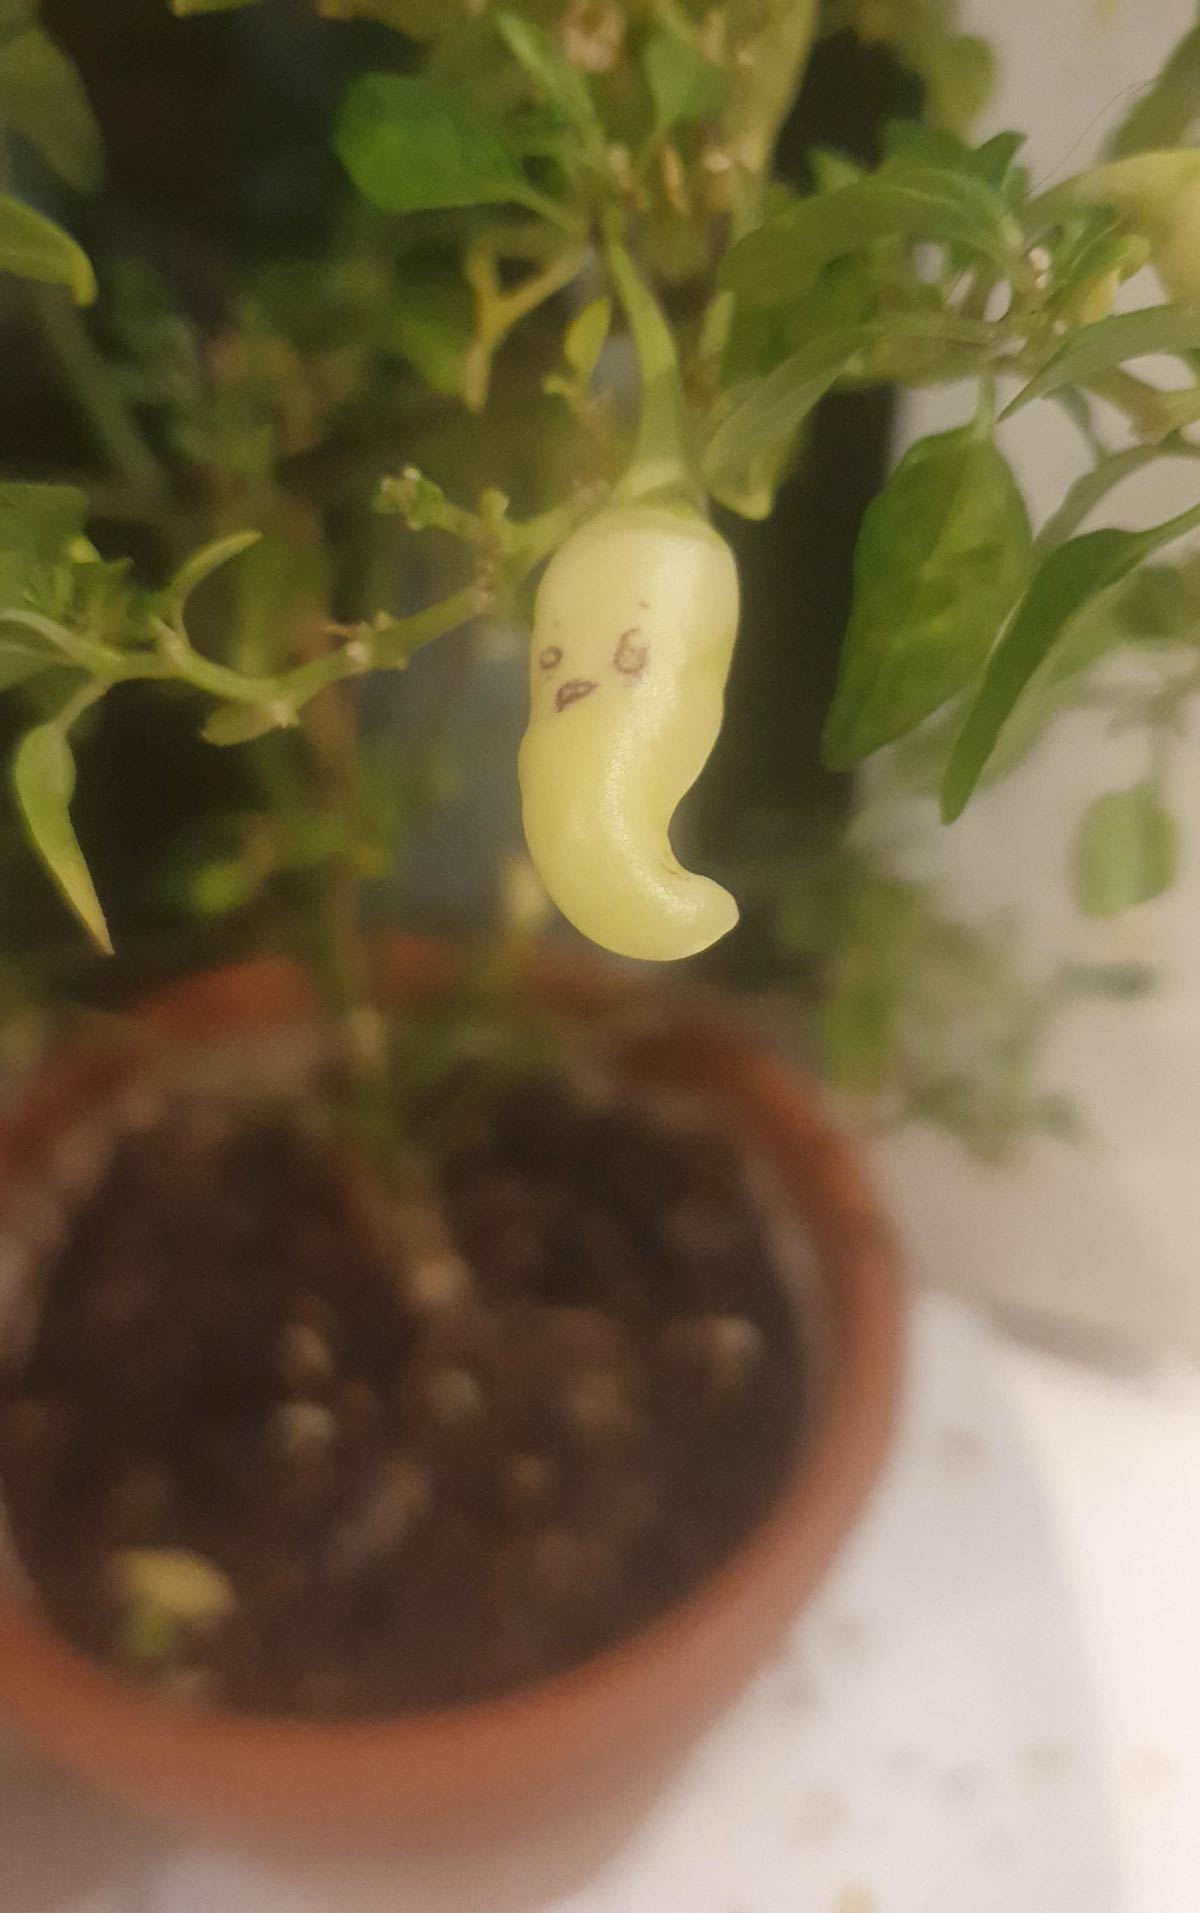 My homegrown chilli has a face